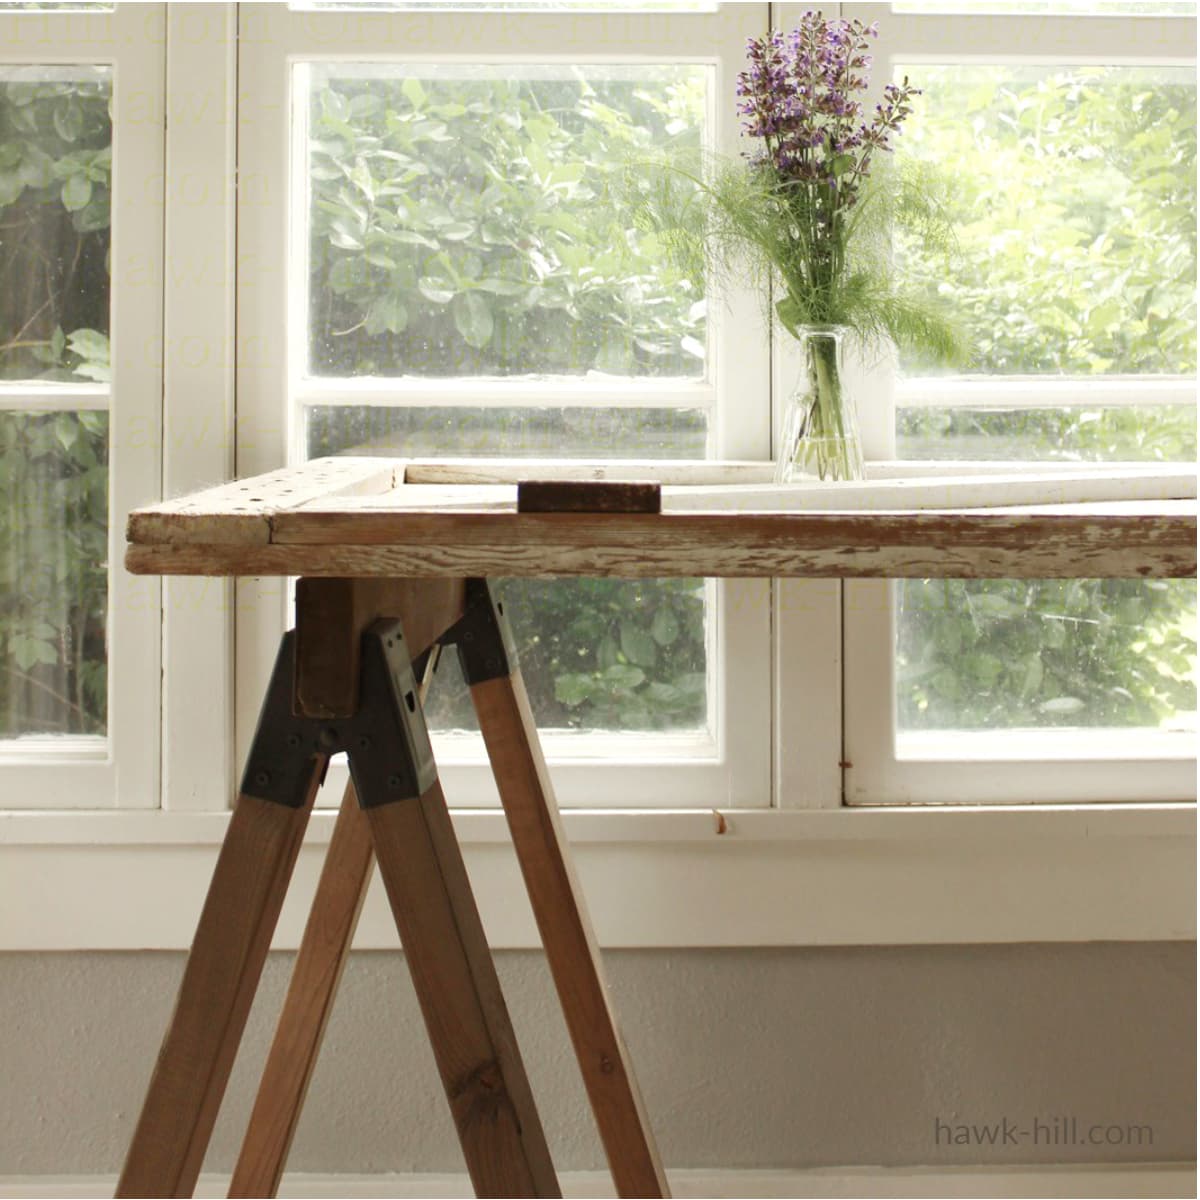 Step by step tutorial for building furniture-quality sawhorse table legs for less than $25.